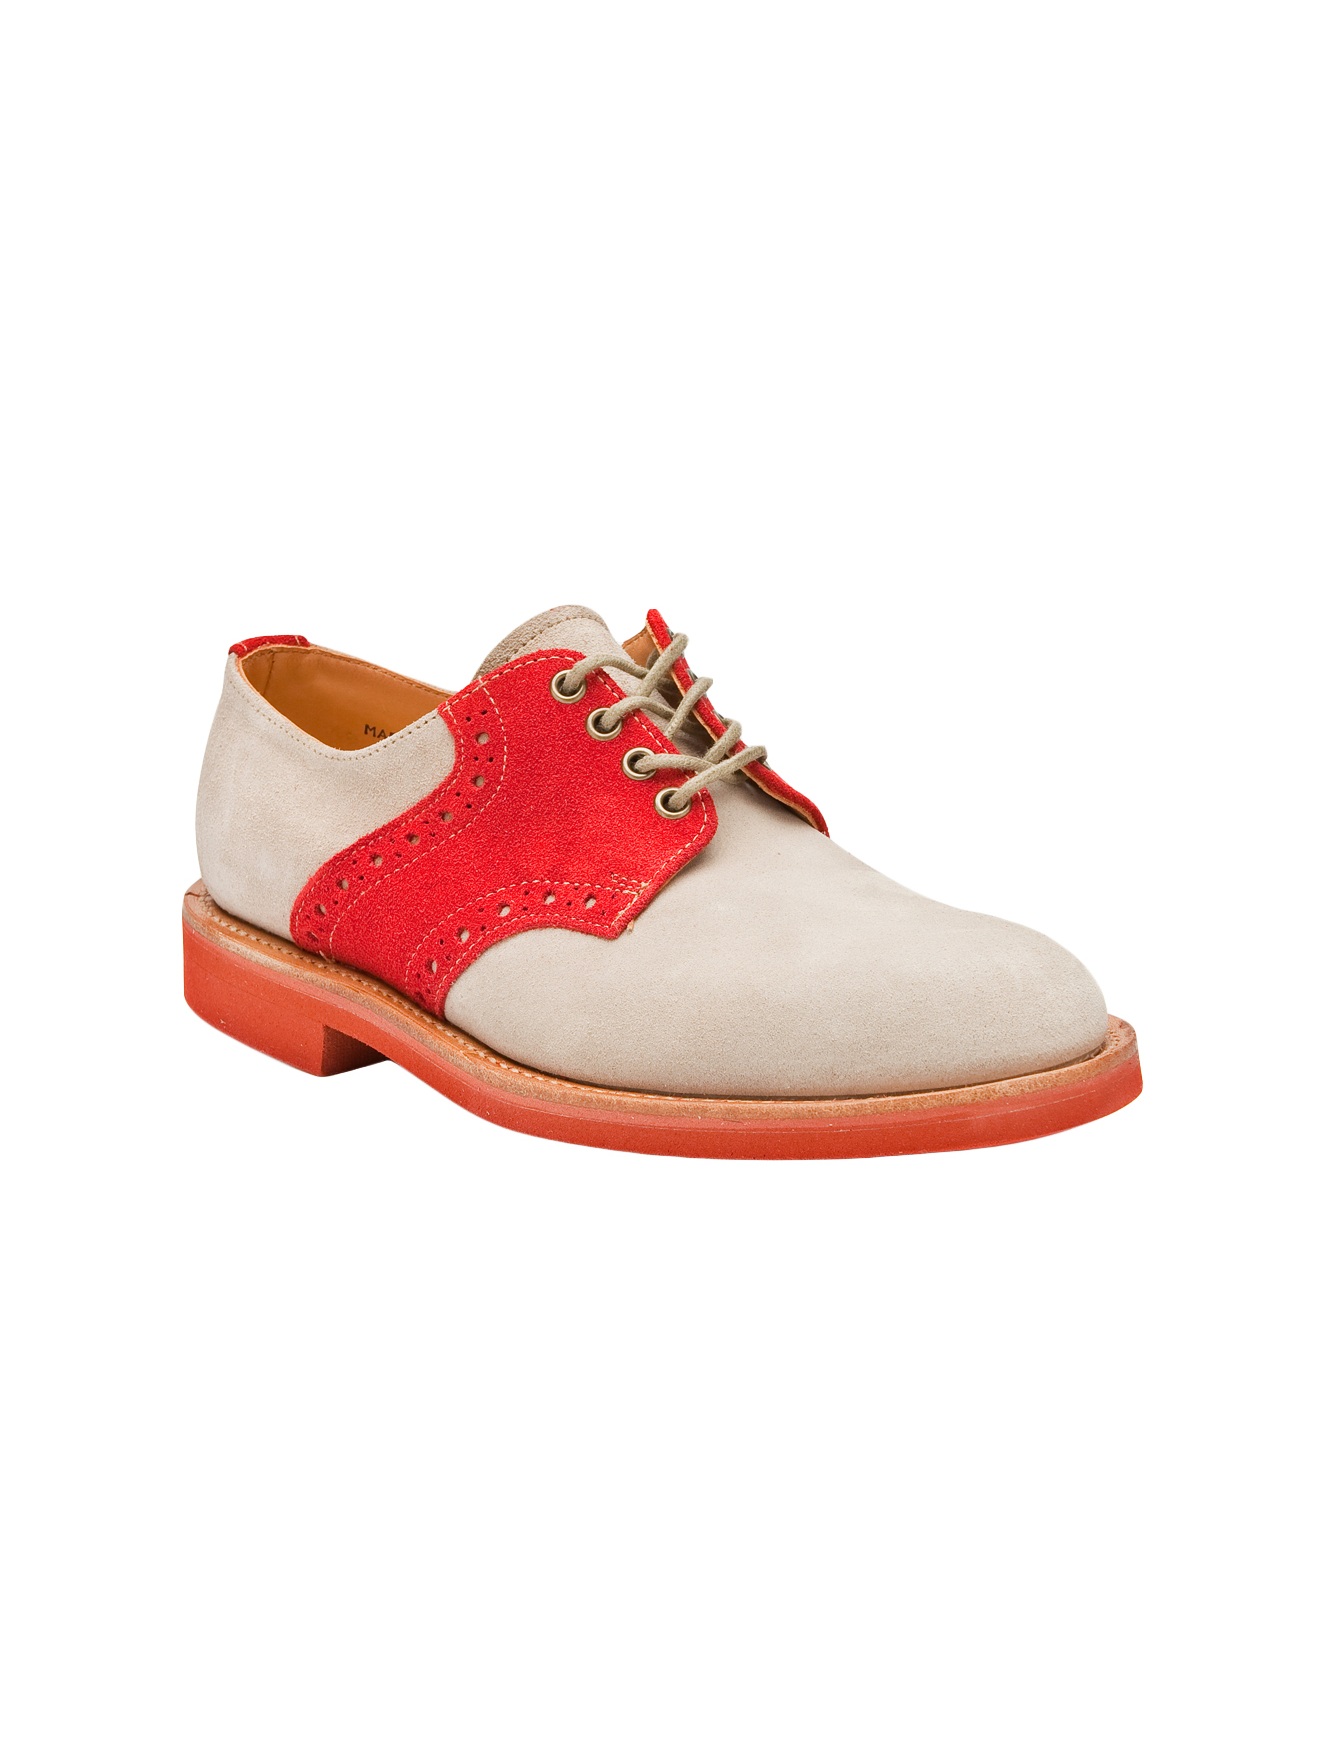 G.h. Bass & Co. Suede Saddle Shoes in Beige (red) | Lyst